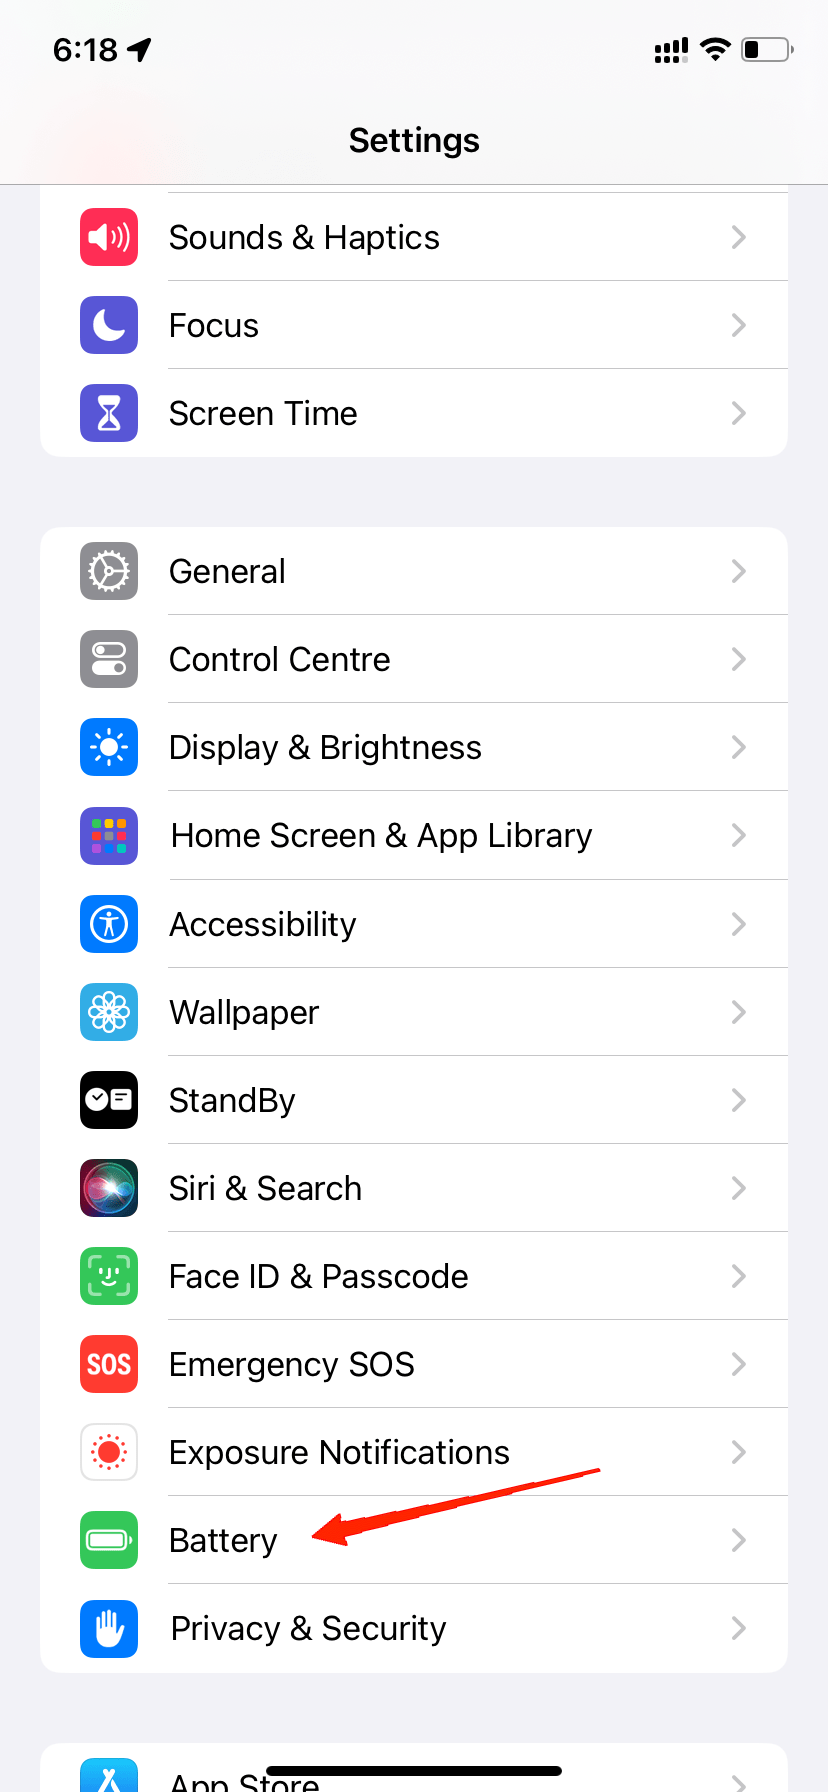 Open the Settings app on your iPhone and navigate to the Battery section.